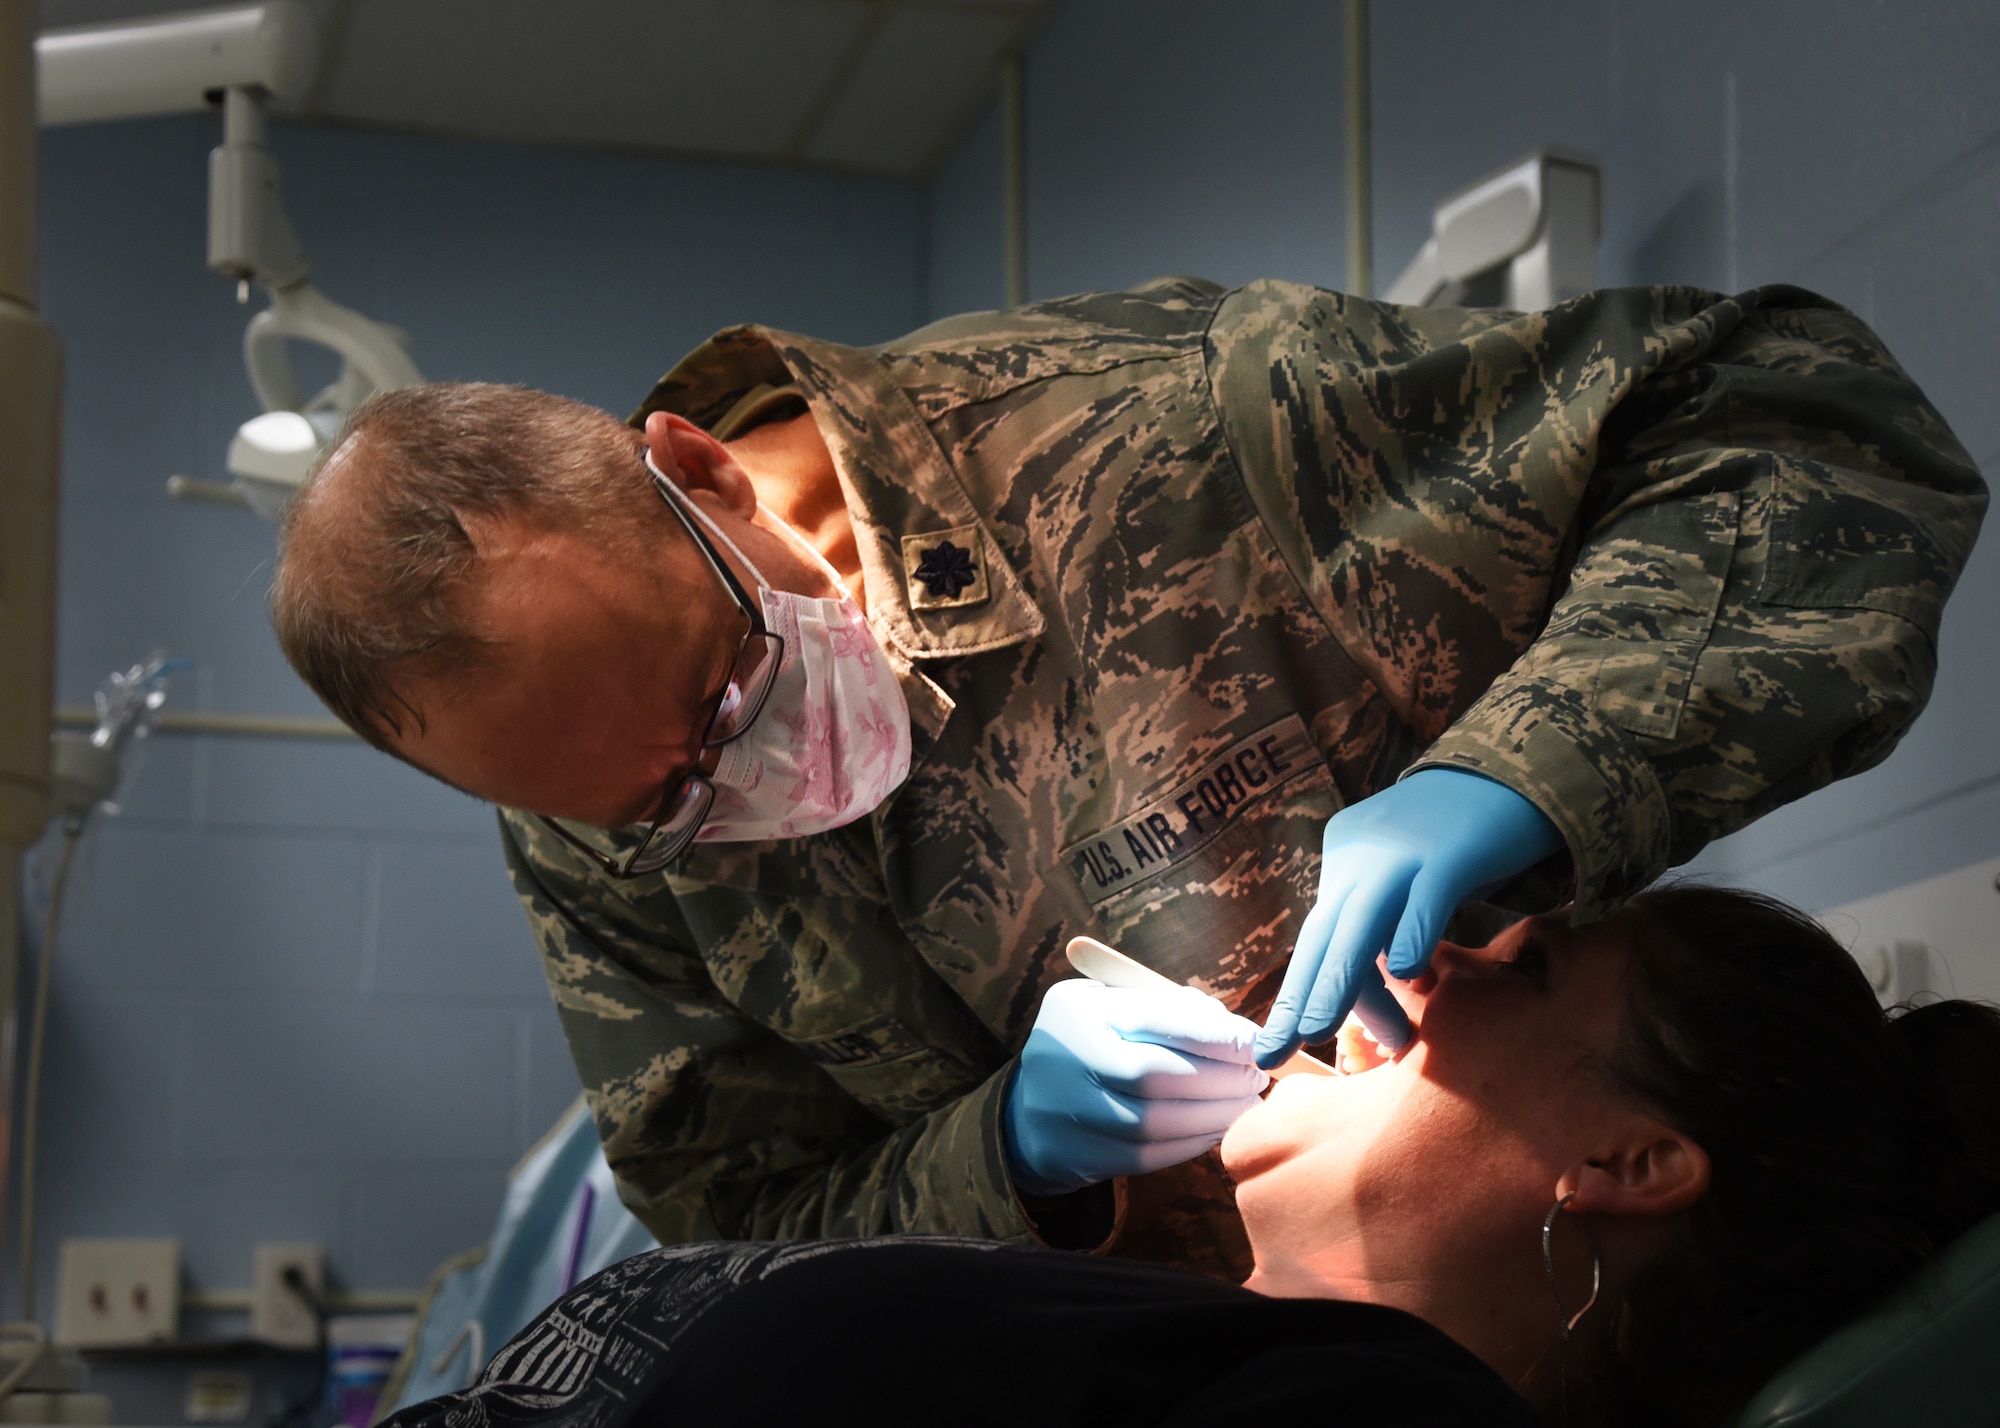 U.S. Air National Guard Lt. Col. Timothy Stuhlmiller, 179th Airlift Wing Medical Group, Mansfield, Ohio, provides a dental examination as part of GuardCare Weekend at the Buckeye Career Center, New Philadelphia, Ohio, Aug. 10, 2019. GuardCare offers the opportunity for community members to receive basic health care and advice. (U.S. Air National Guard photo by Senior Airman Gwendalyn Smith)